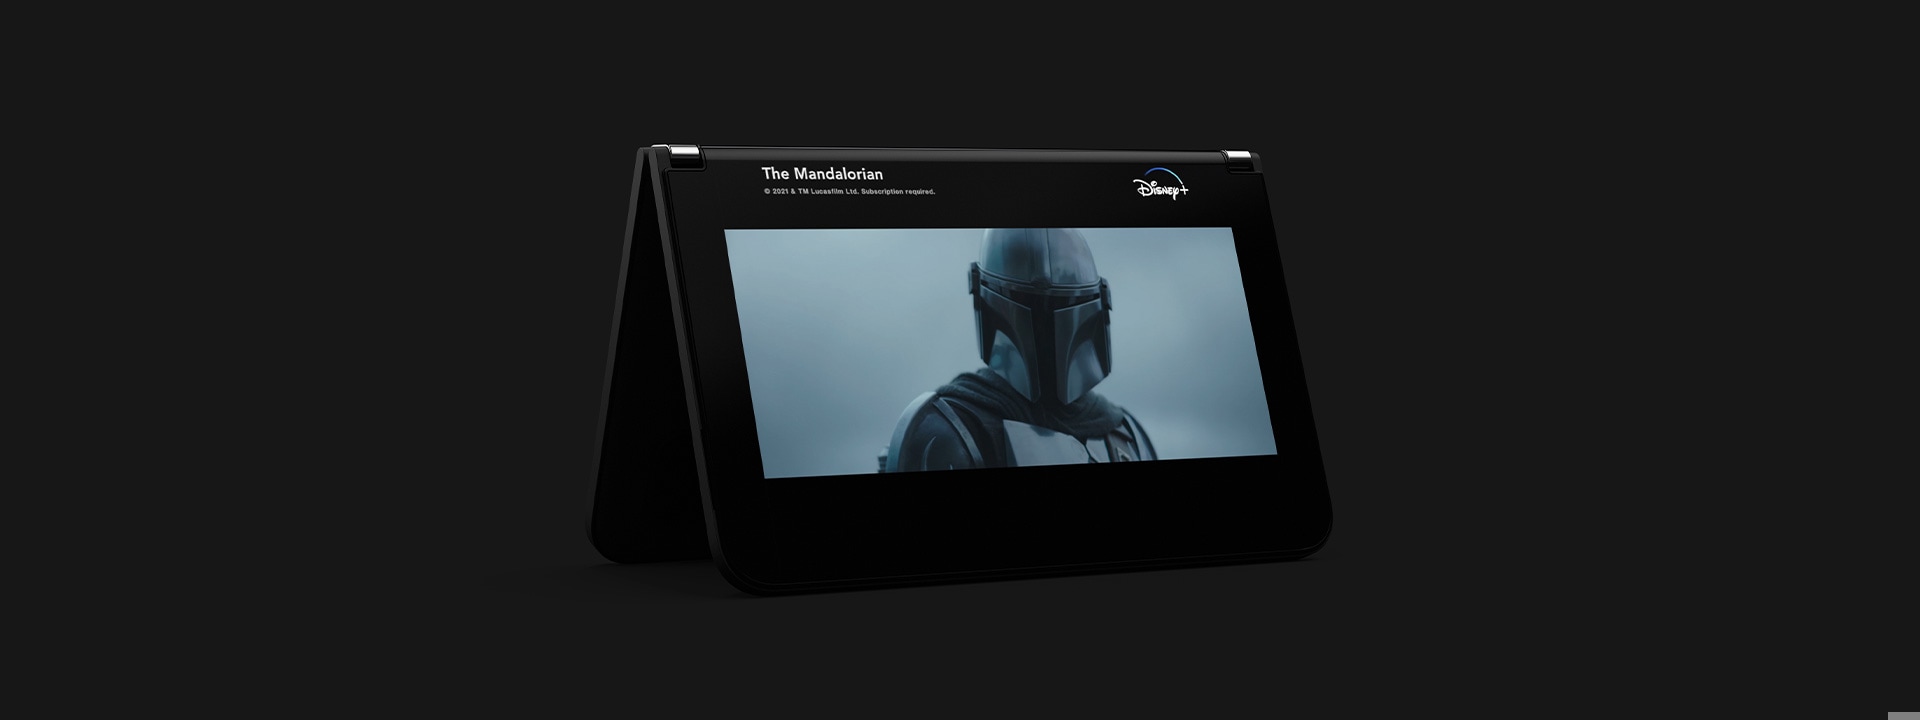 Surface Duo 2 in Tent Mode displaying The Mandalorian on Disney+.